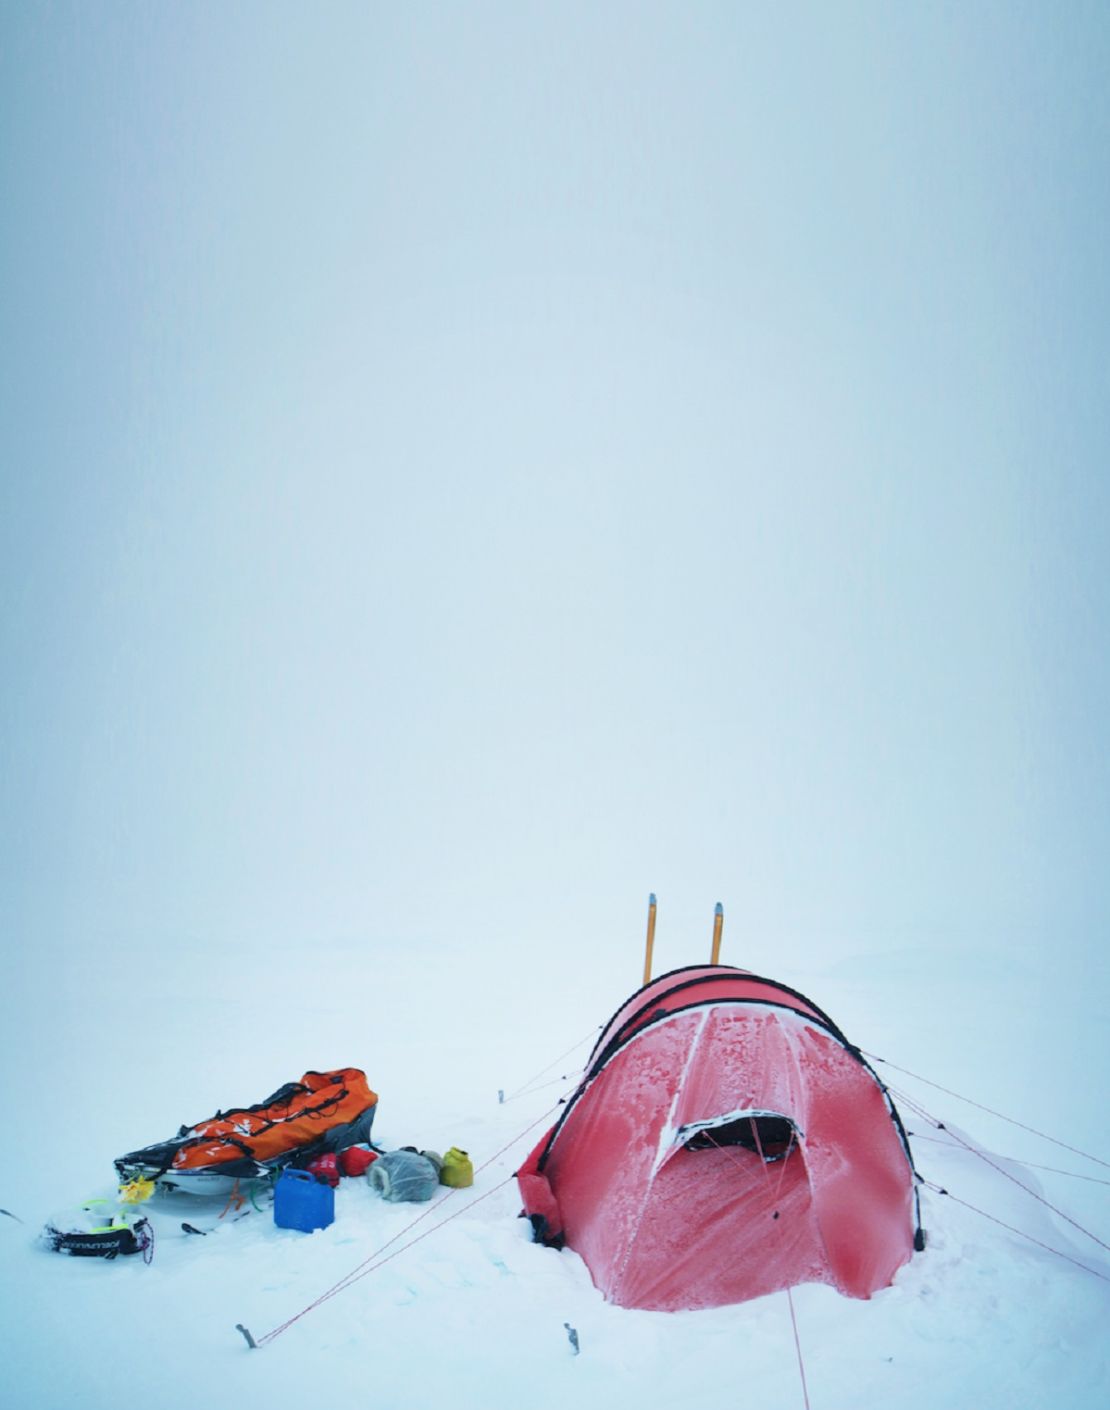 Davidsson's tent and sled set up on Antarctica during her 2016 trip to the South Pole.